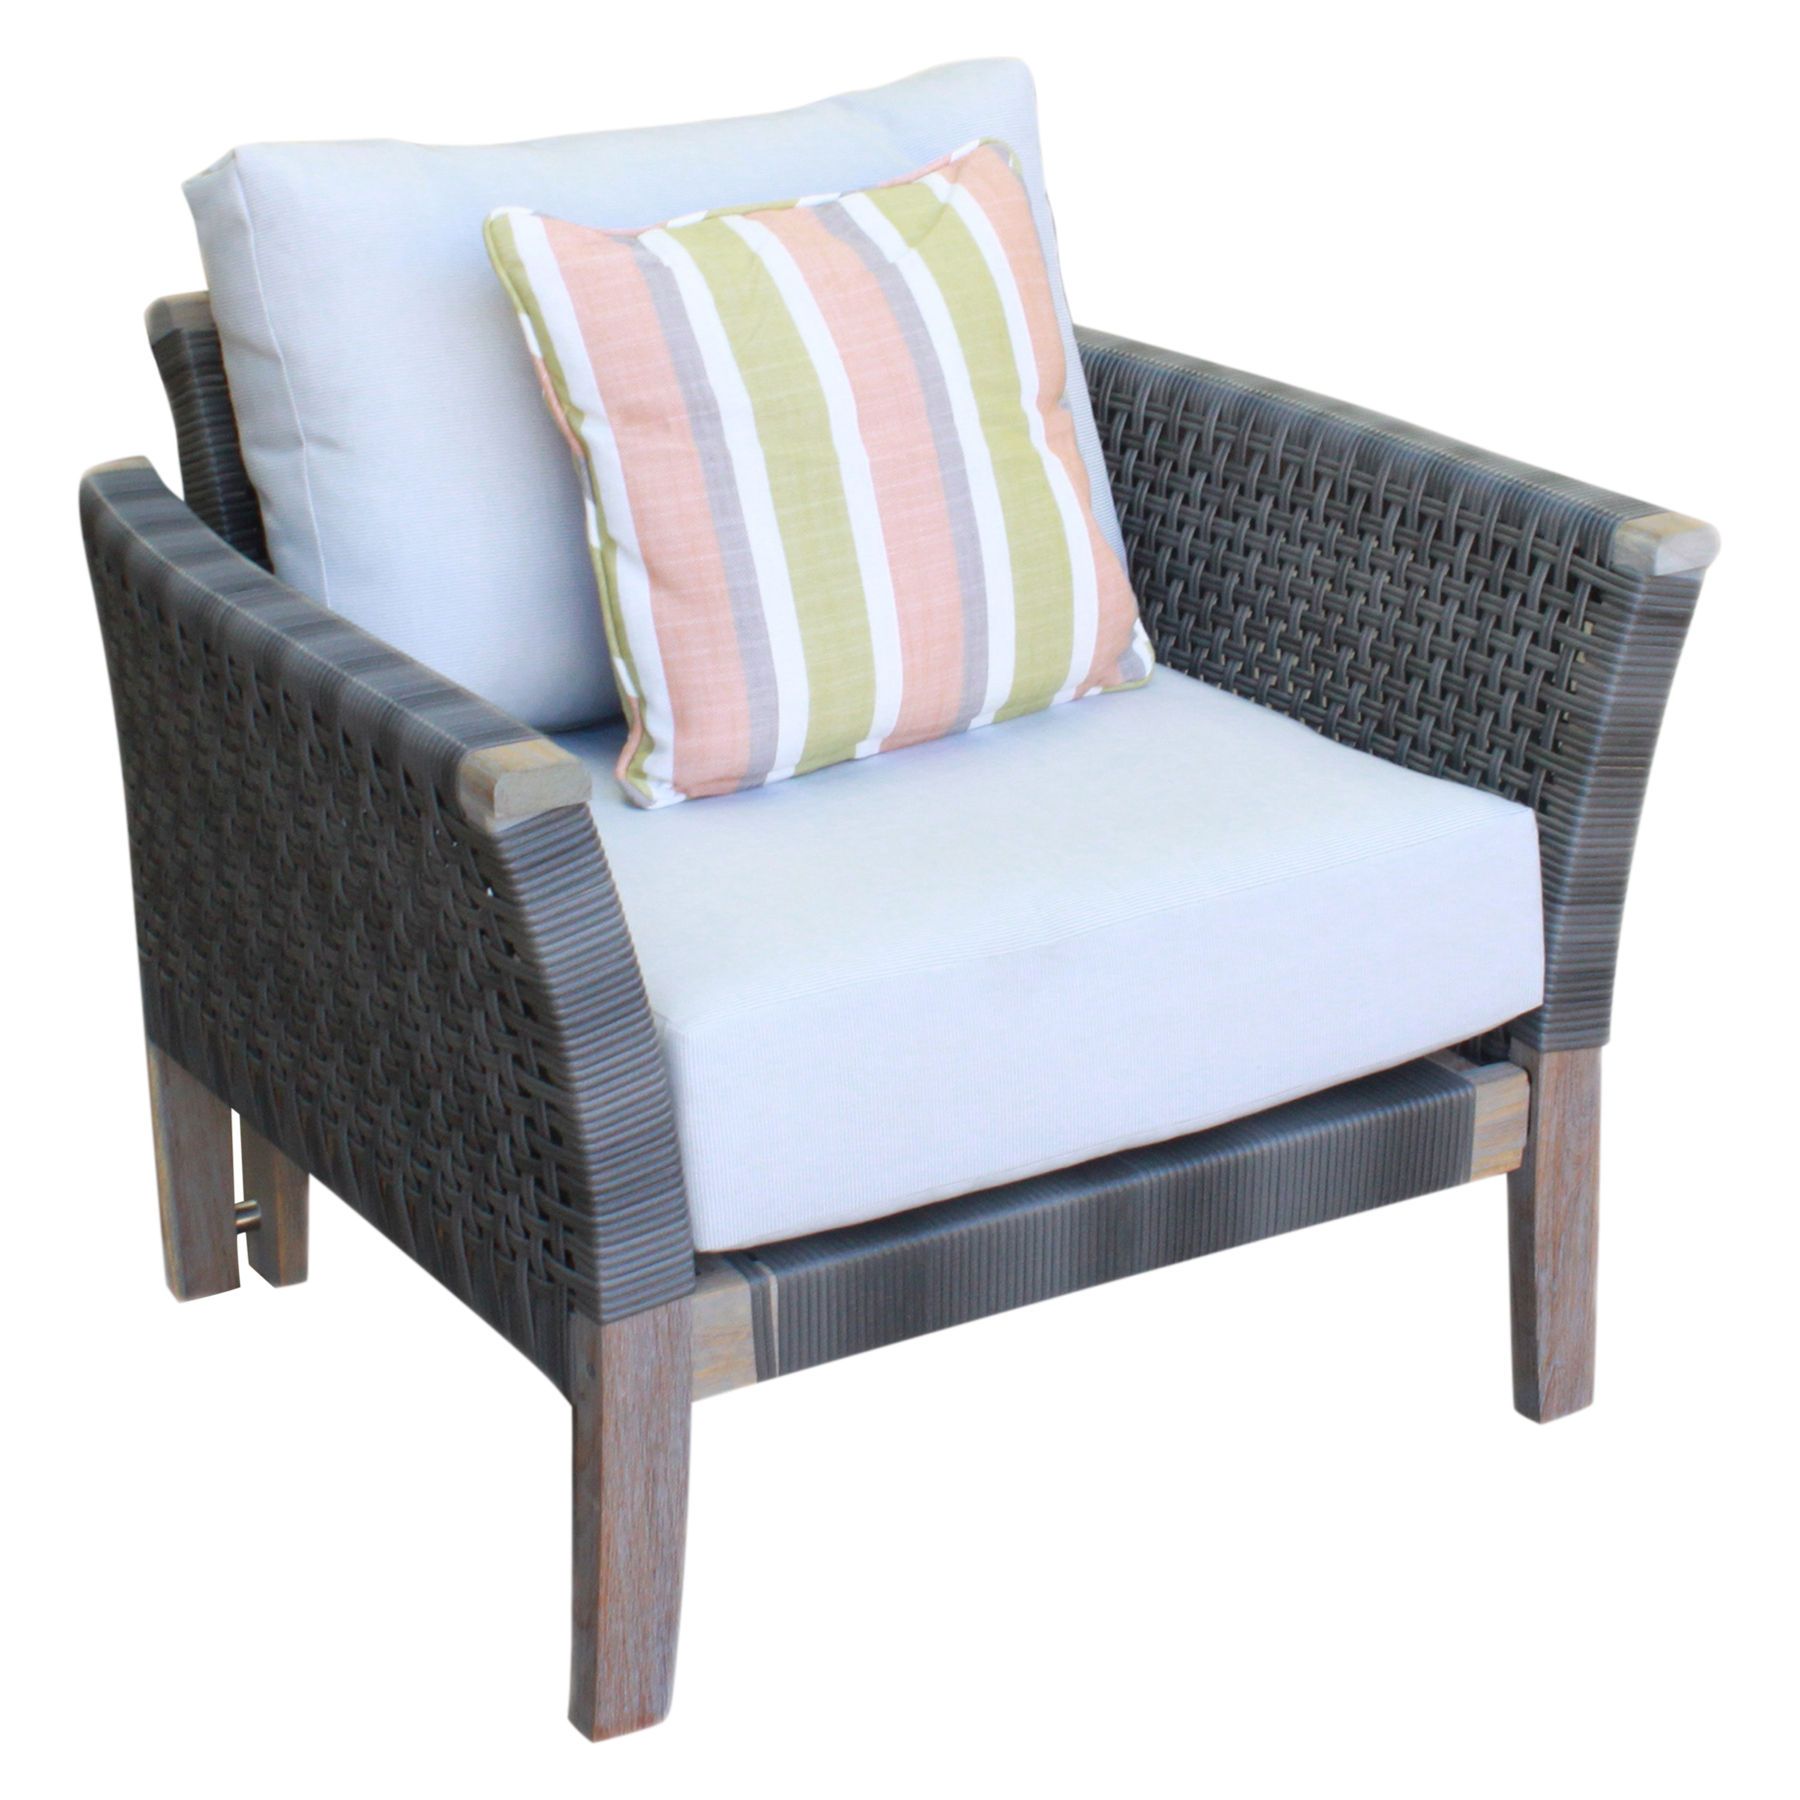 Paradise Outdoor Armchairqfurniture | Zanui Throughout Outdoor Armchairs (View 5 of 15)